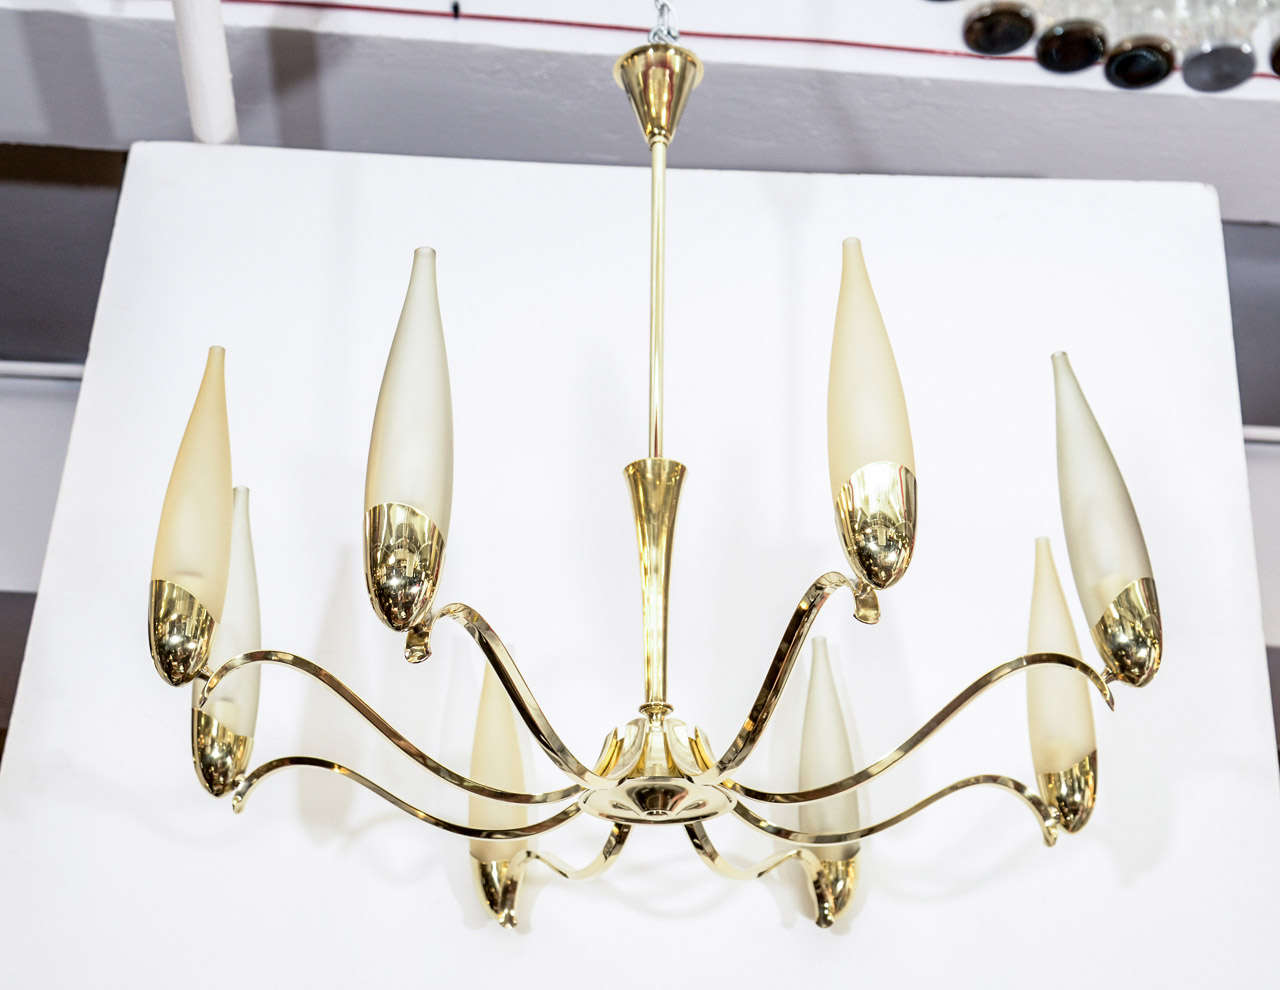 A vintage Italian chandelier with a brass body and eight opaline glass shades attributed to Stilnovo, circa 1958.